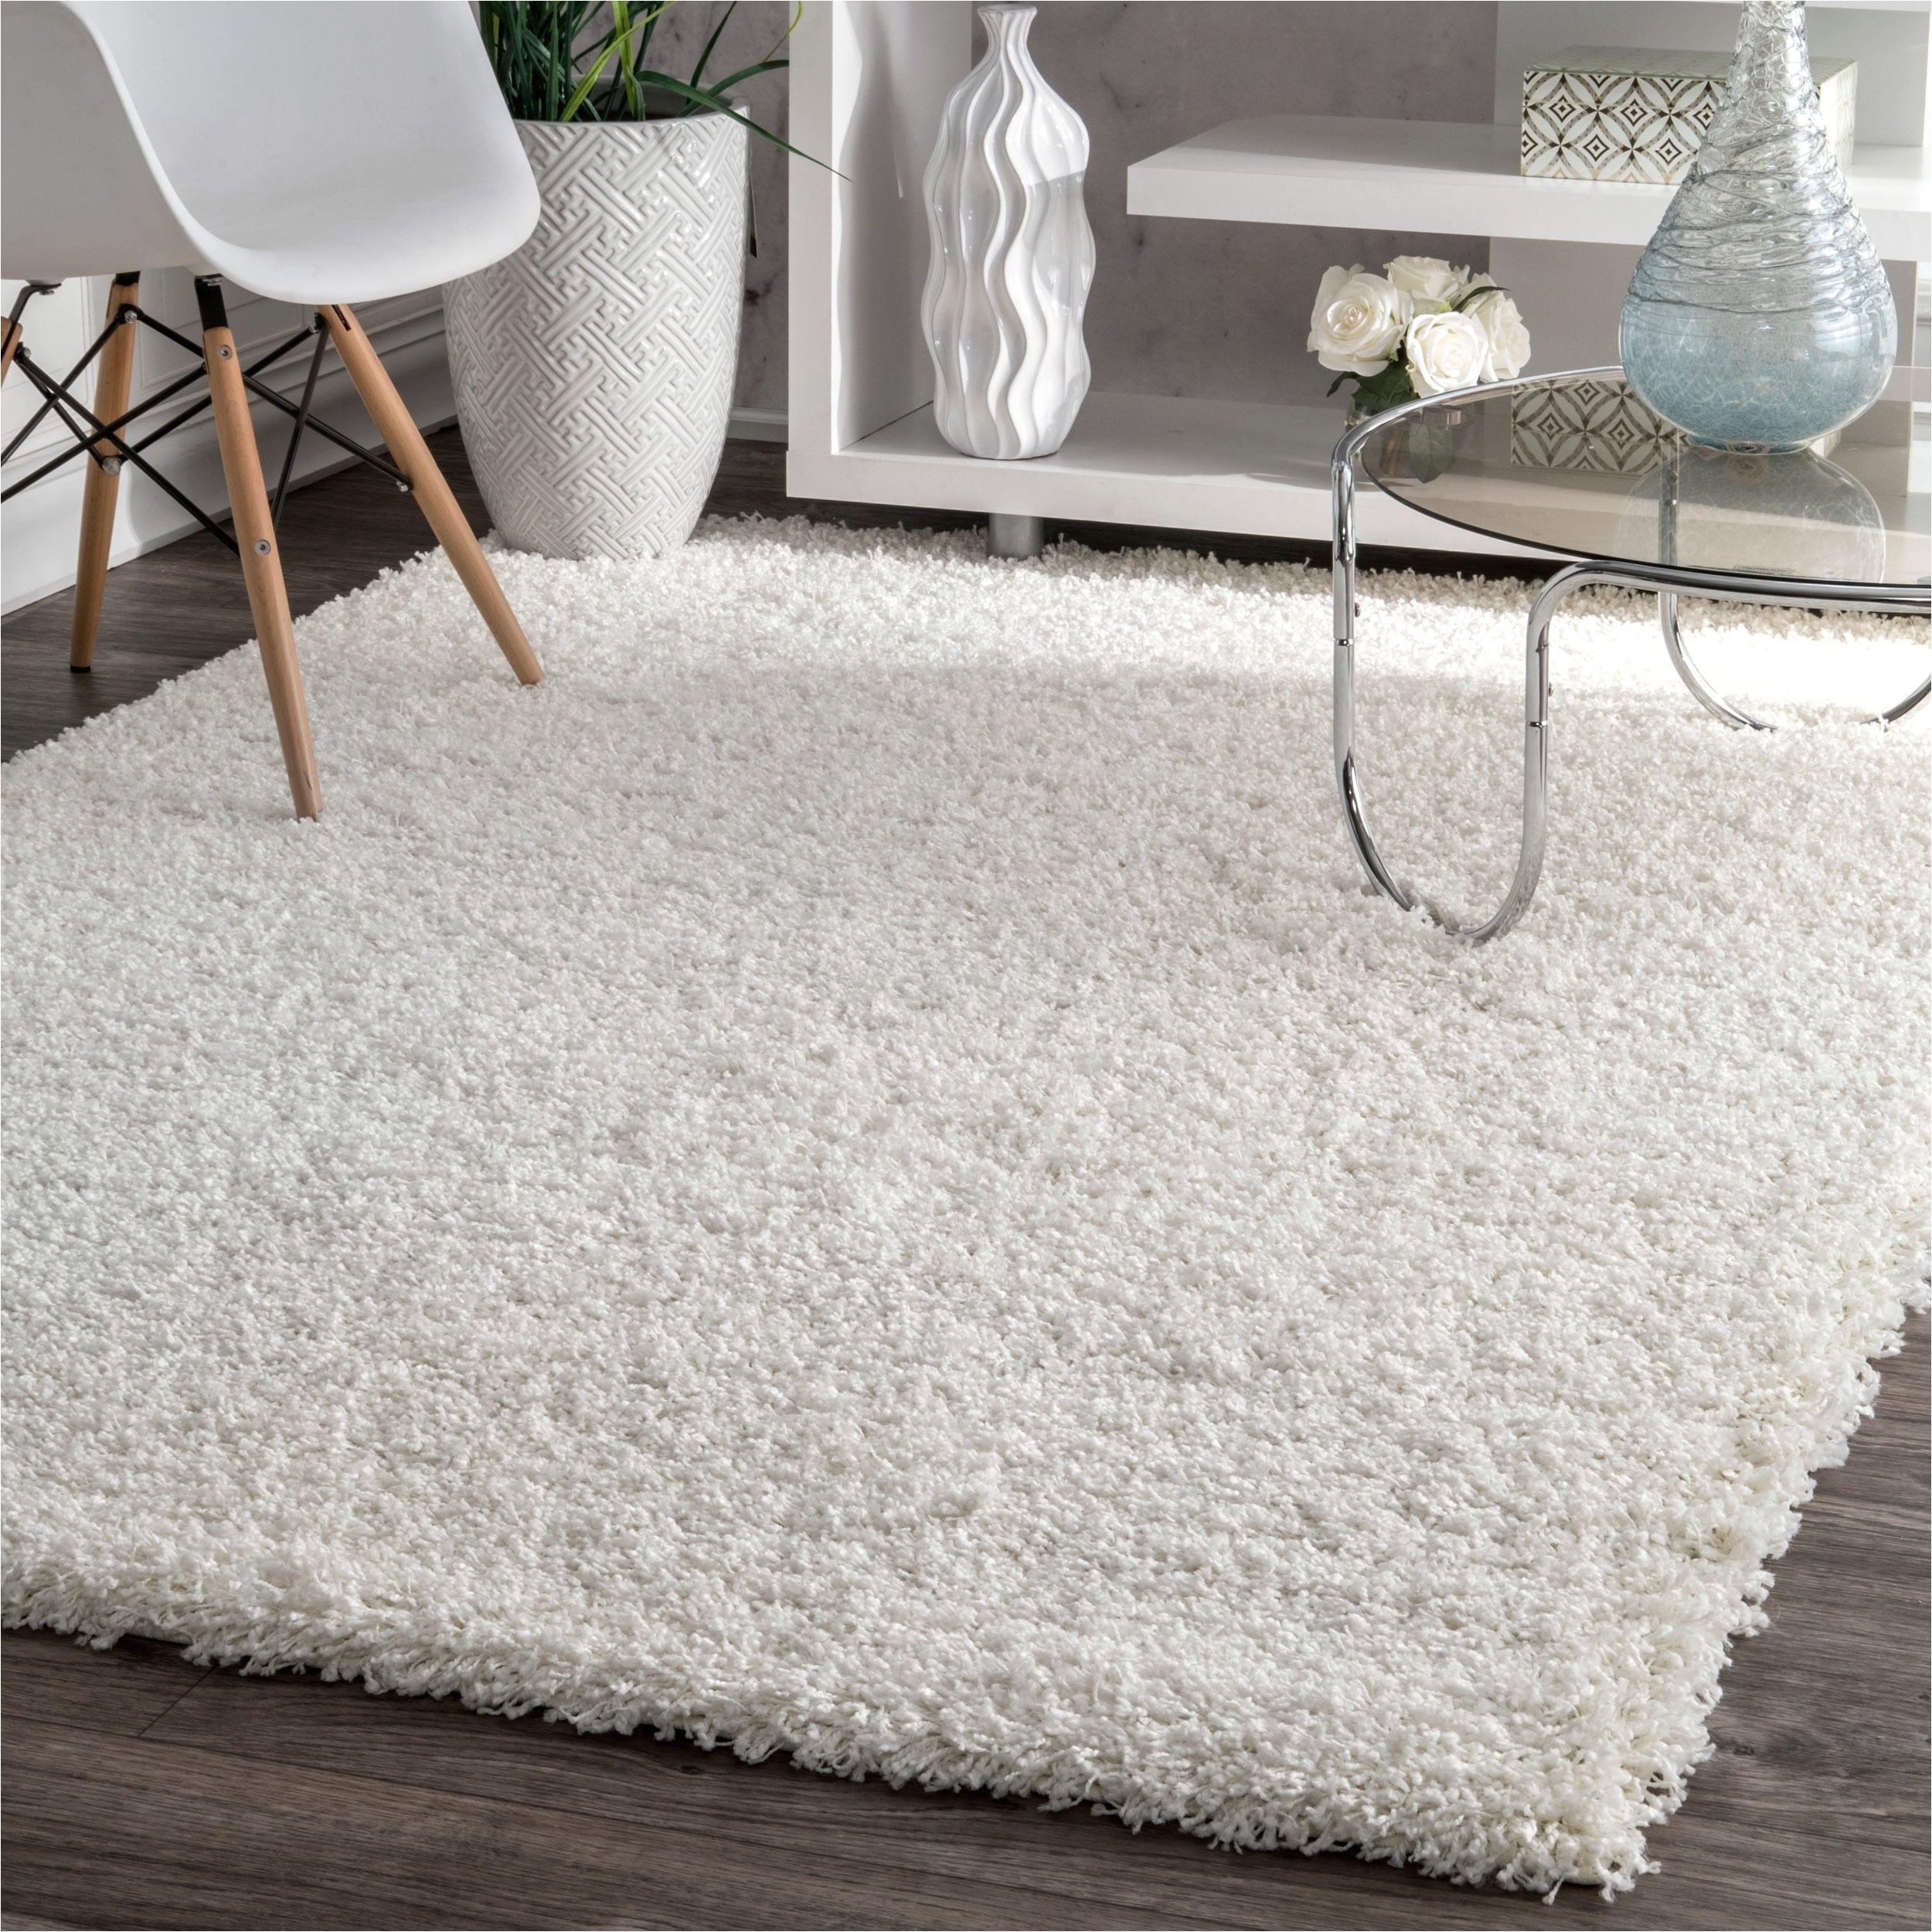 nuloom alexa my soft and plush shag rug 8 x 10 white size 8 x 10 polyester solid